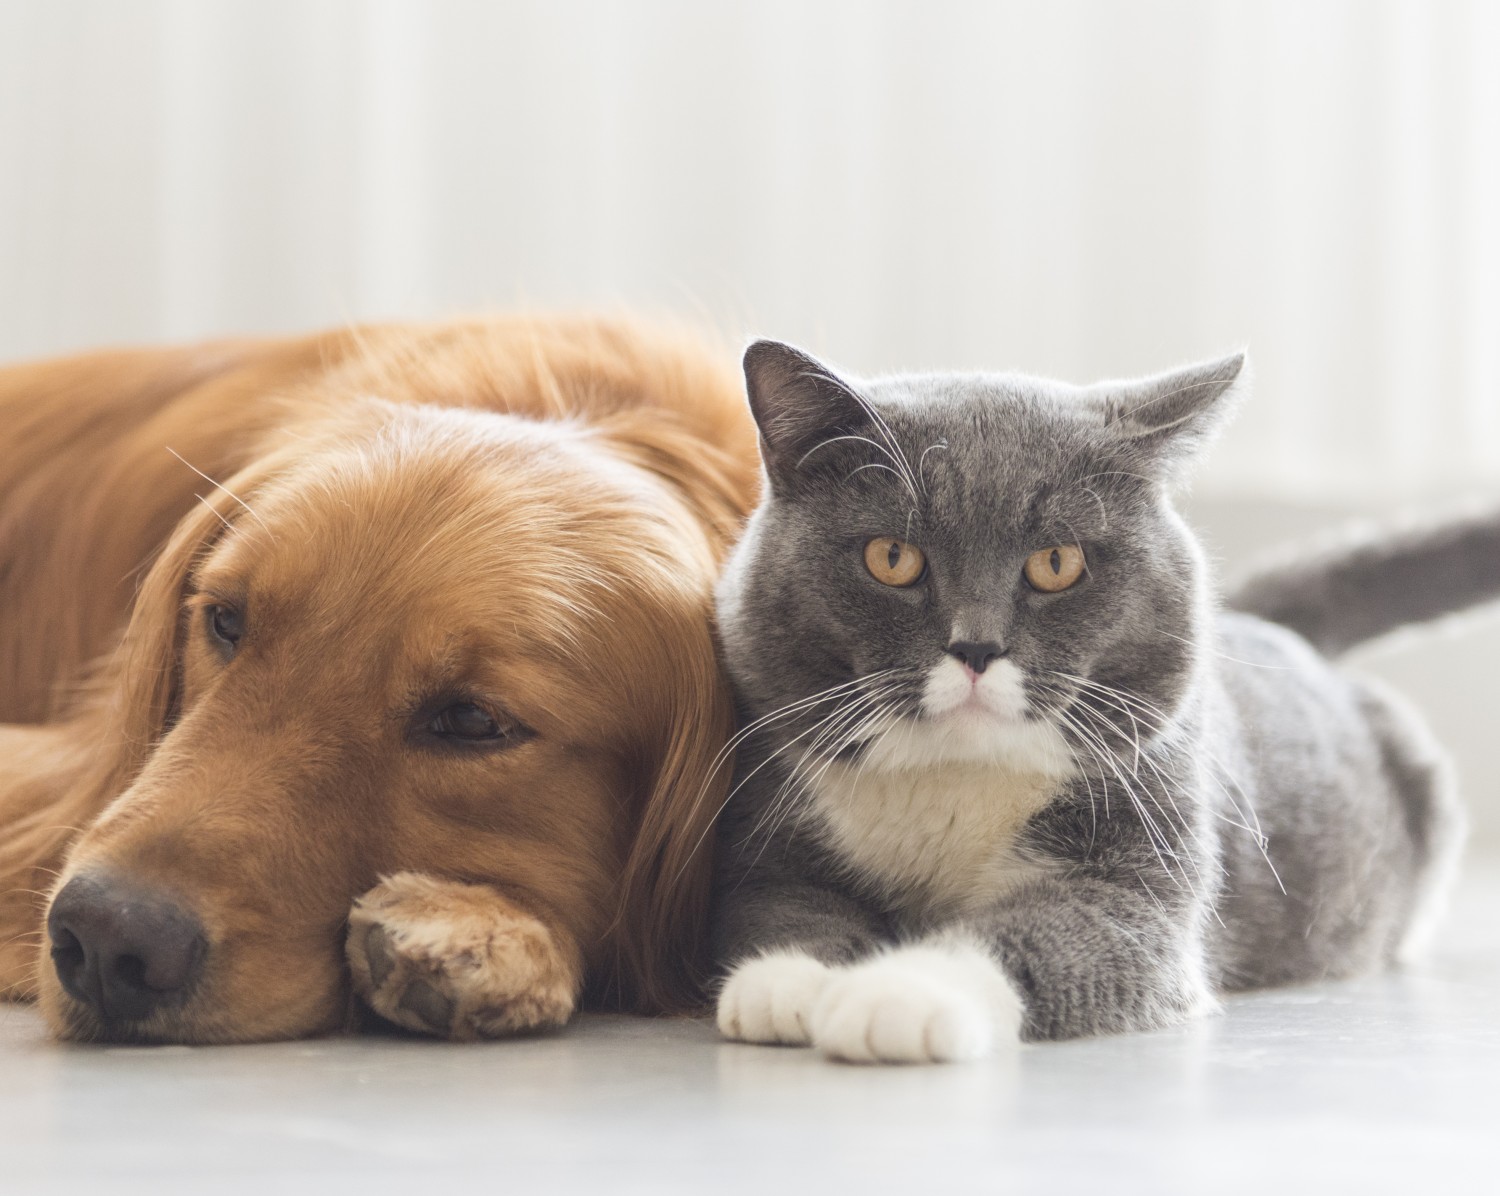 Golden Retriever and Grey and White Cat